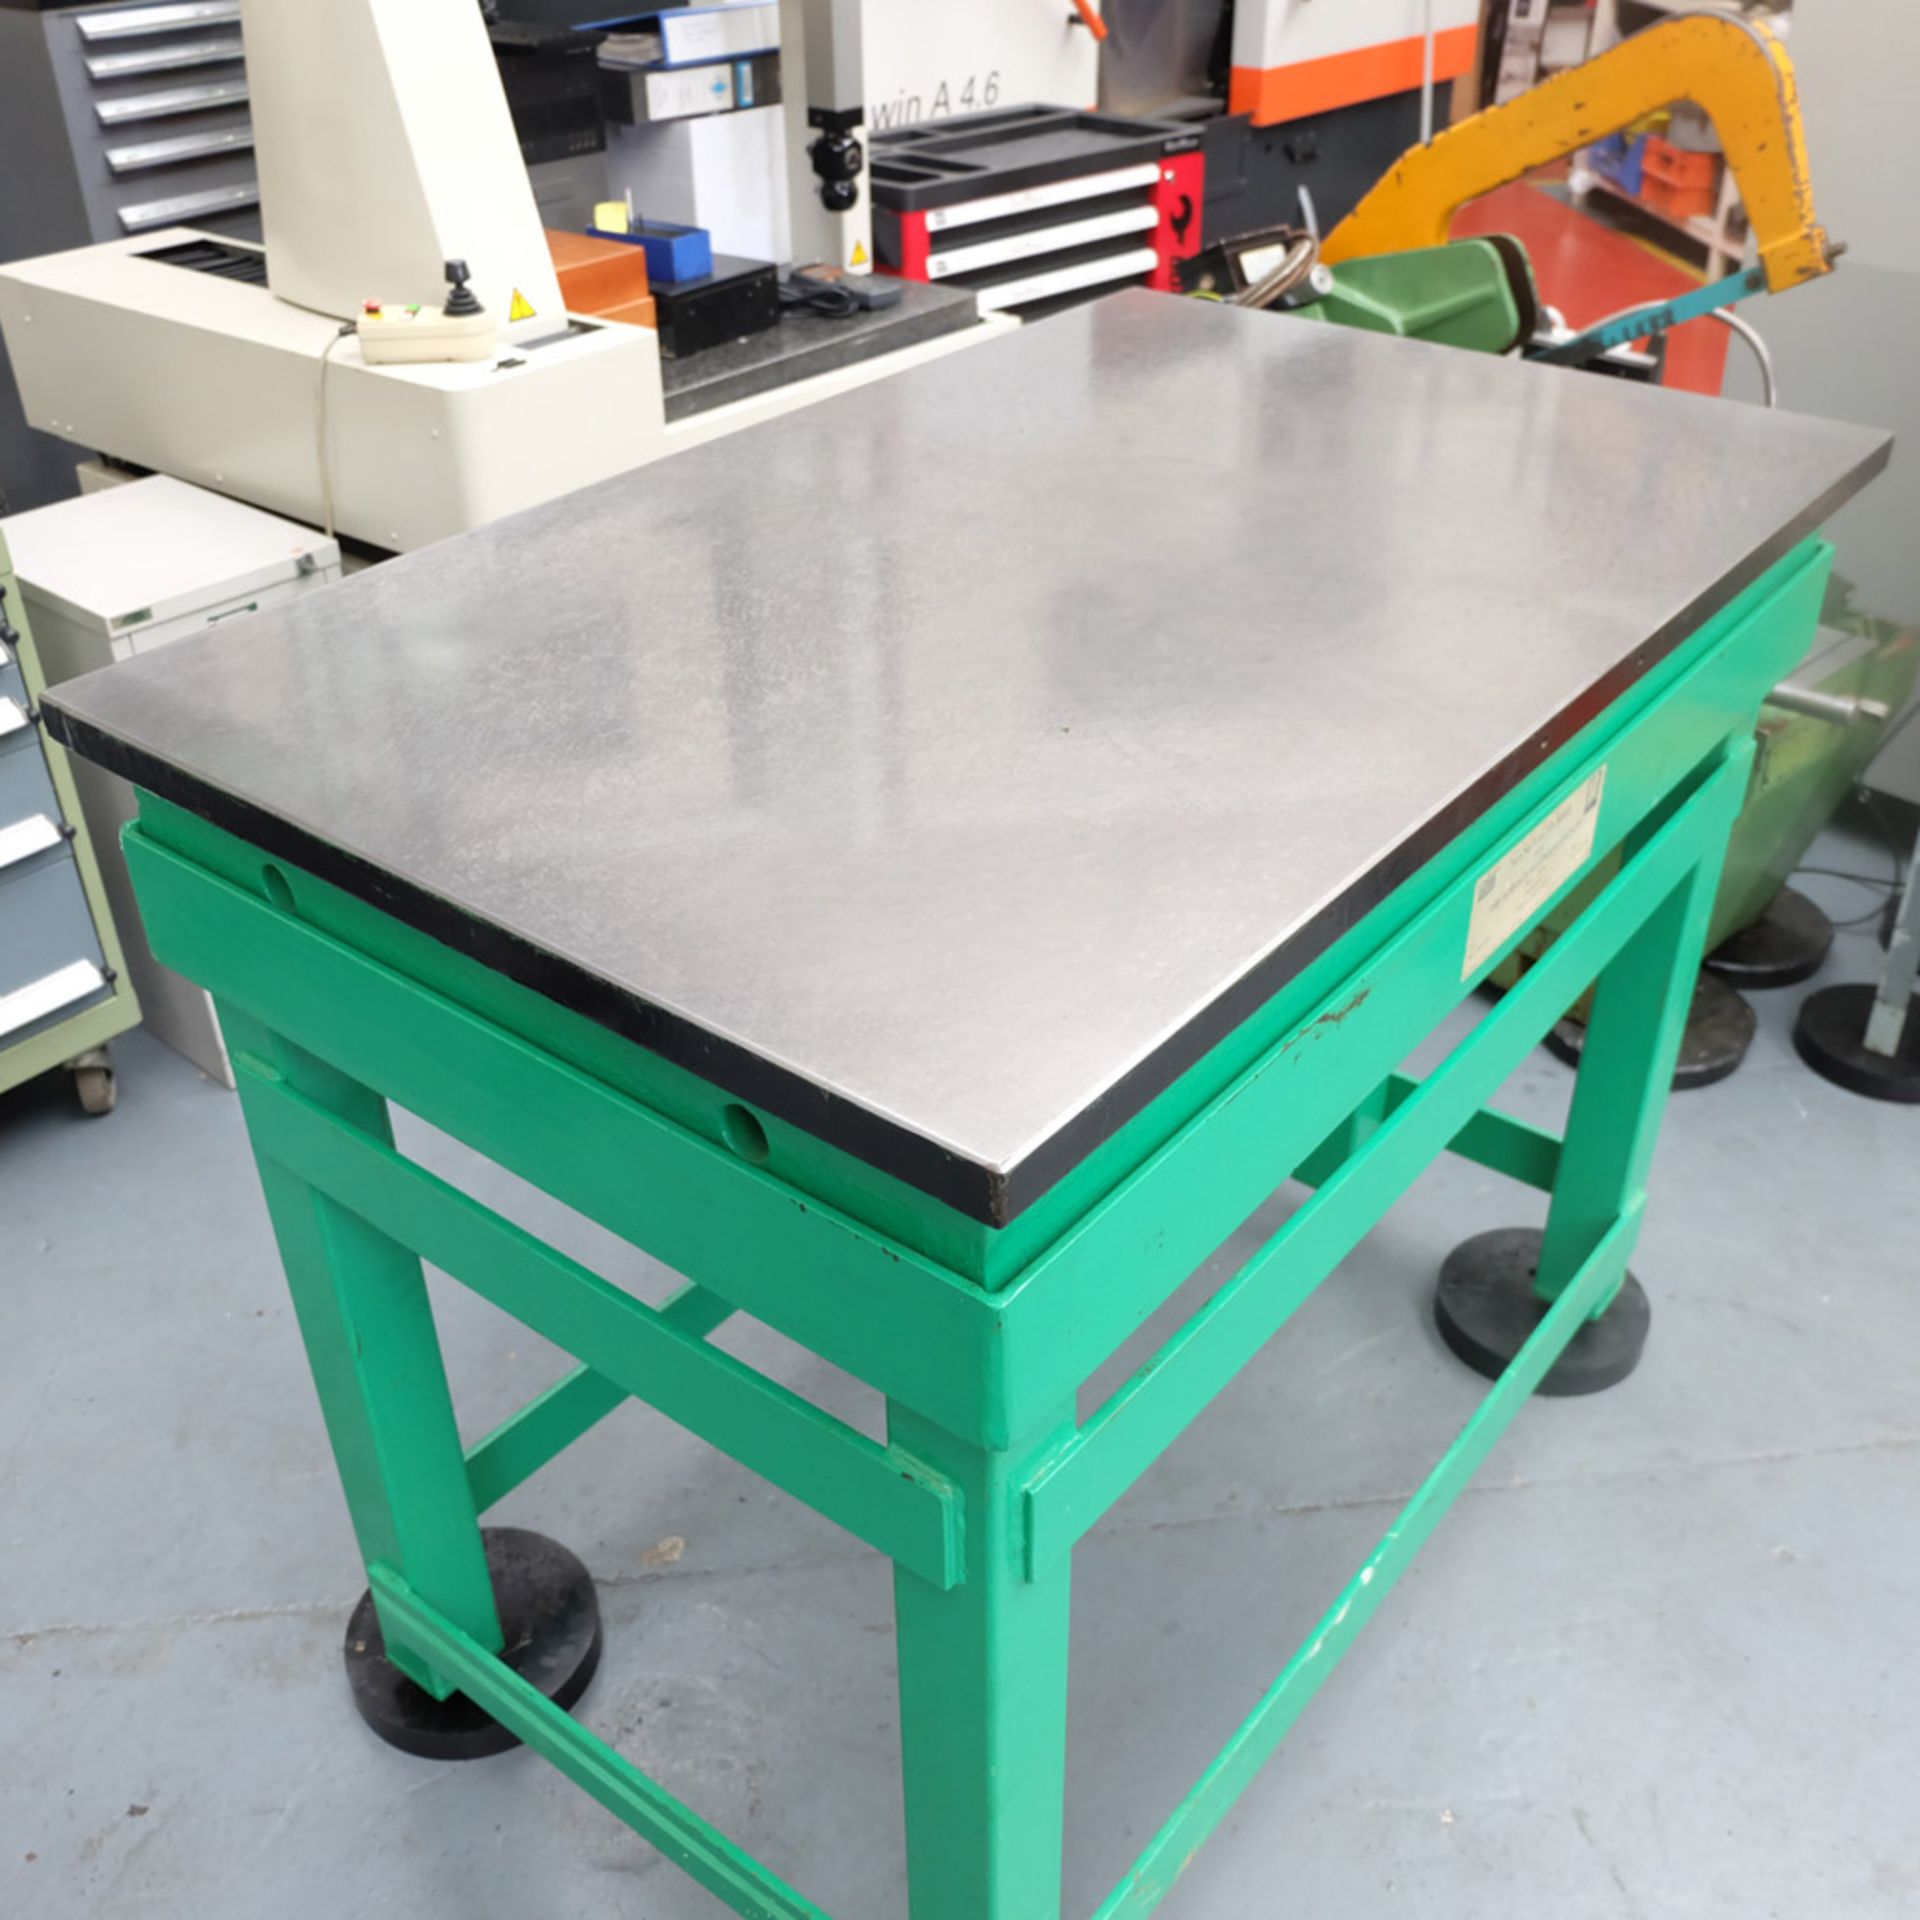 Cast Iron Tool Room Surface Table. Grade 1. Manufactured by surface Flatness Co. Size 48" x 30". - Image 4 of 6